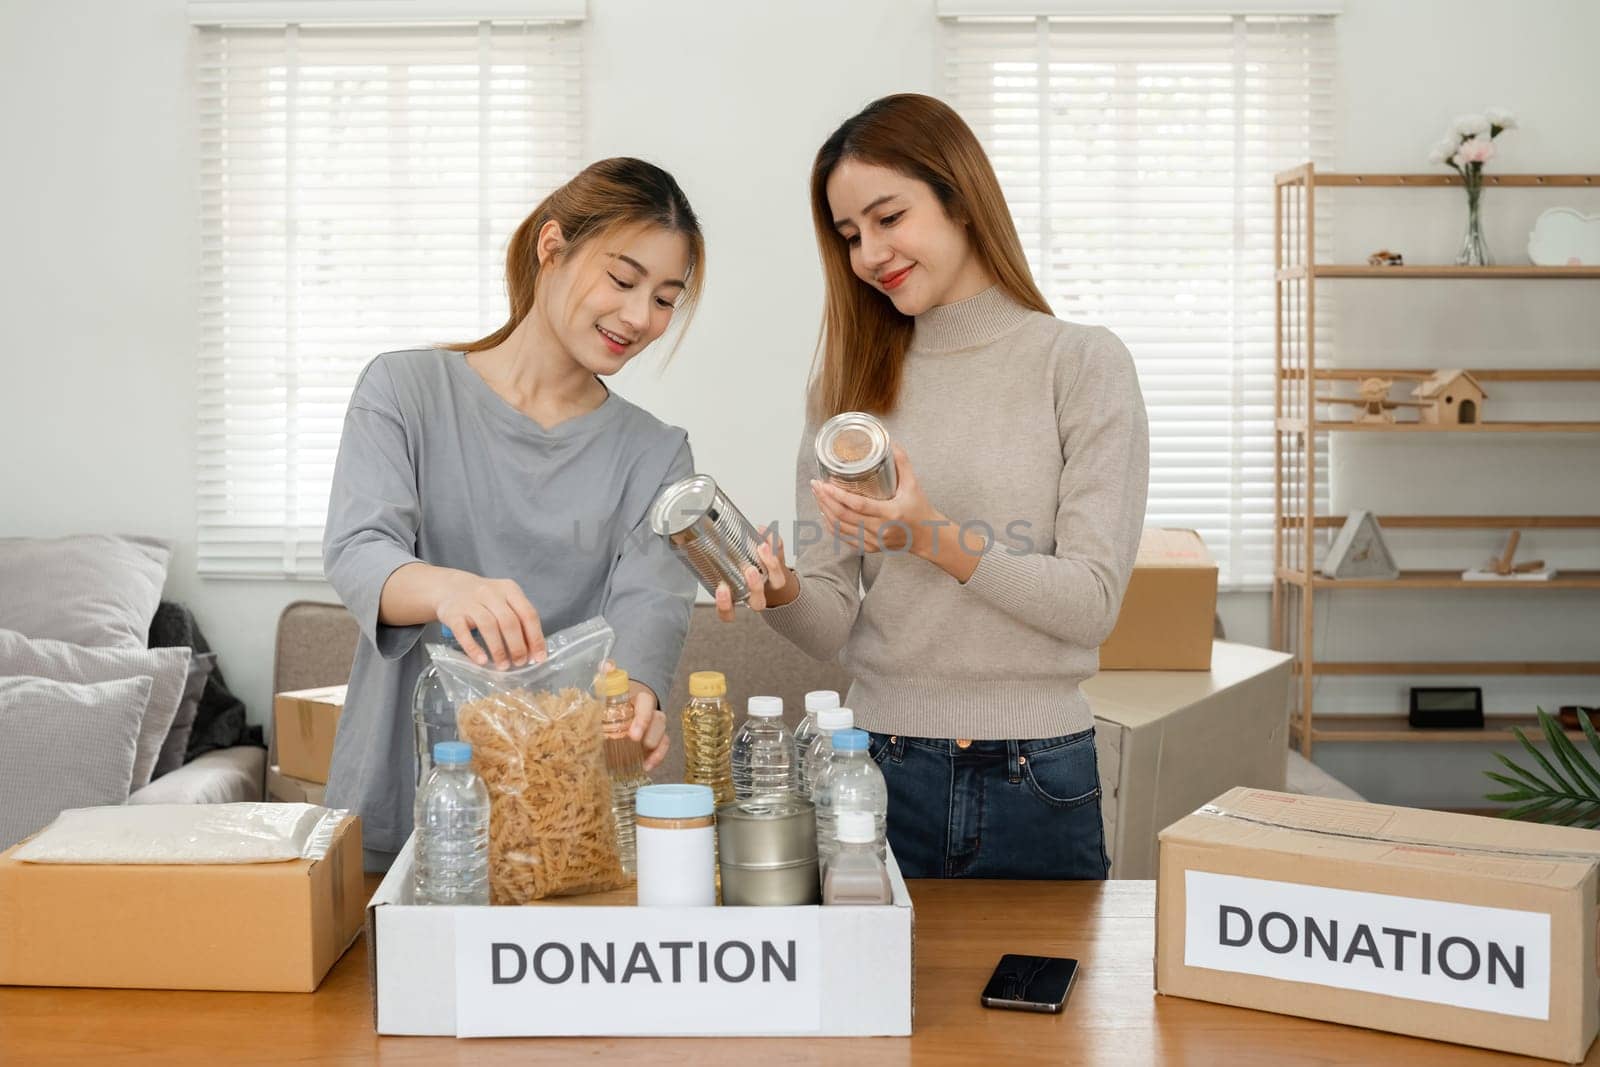 Two young female volunteers help pack food into donation boxes and prepare to donate them to charity.